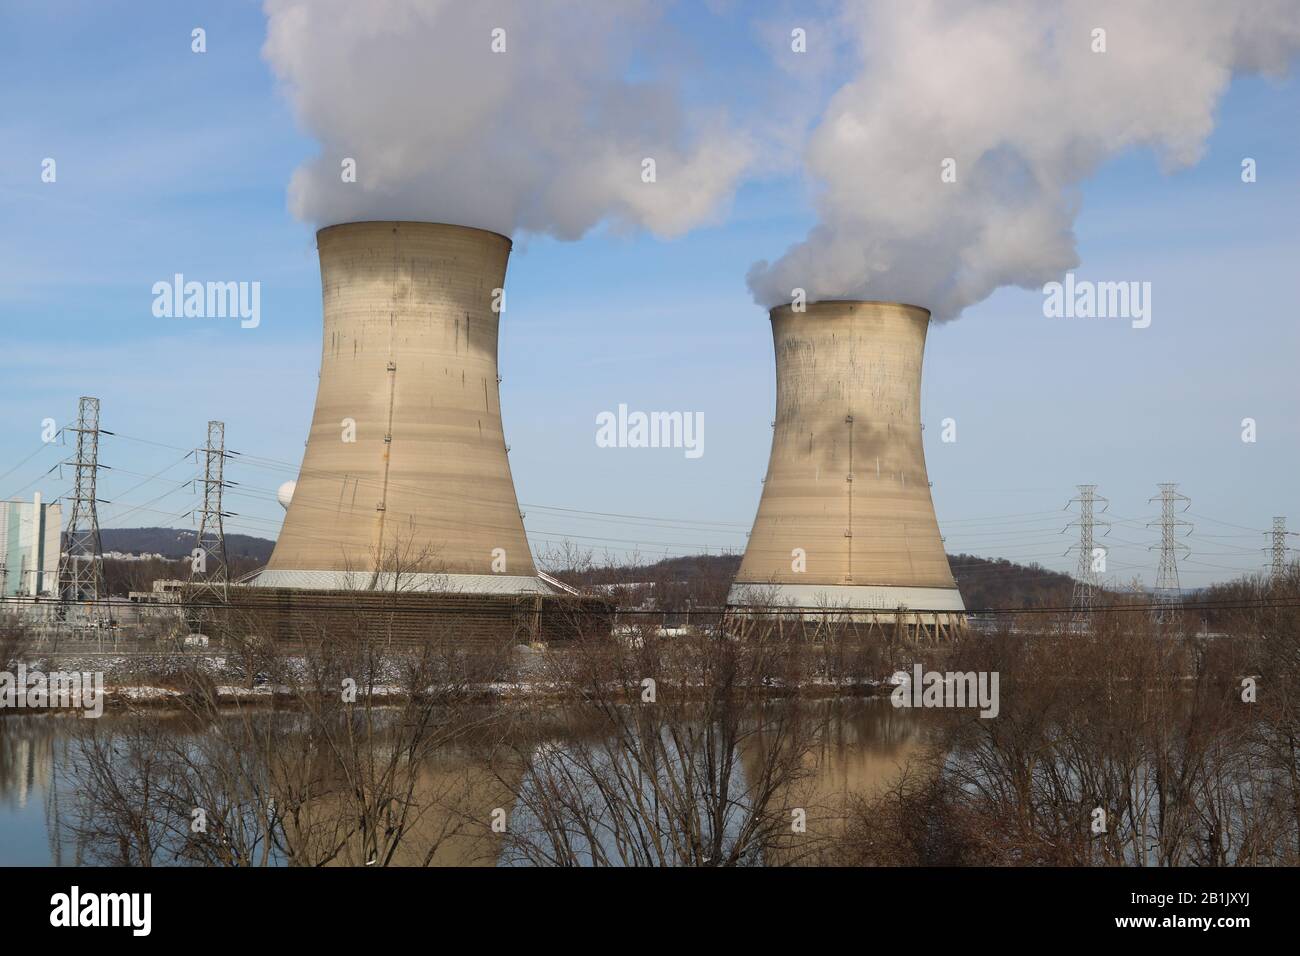 The Nuclear Reactors at Three Mile Island. Stock Photo